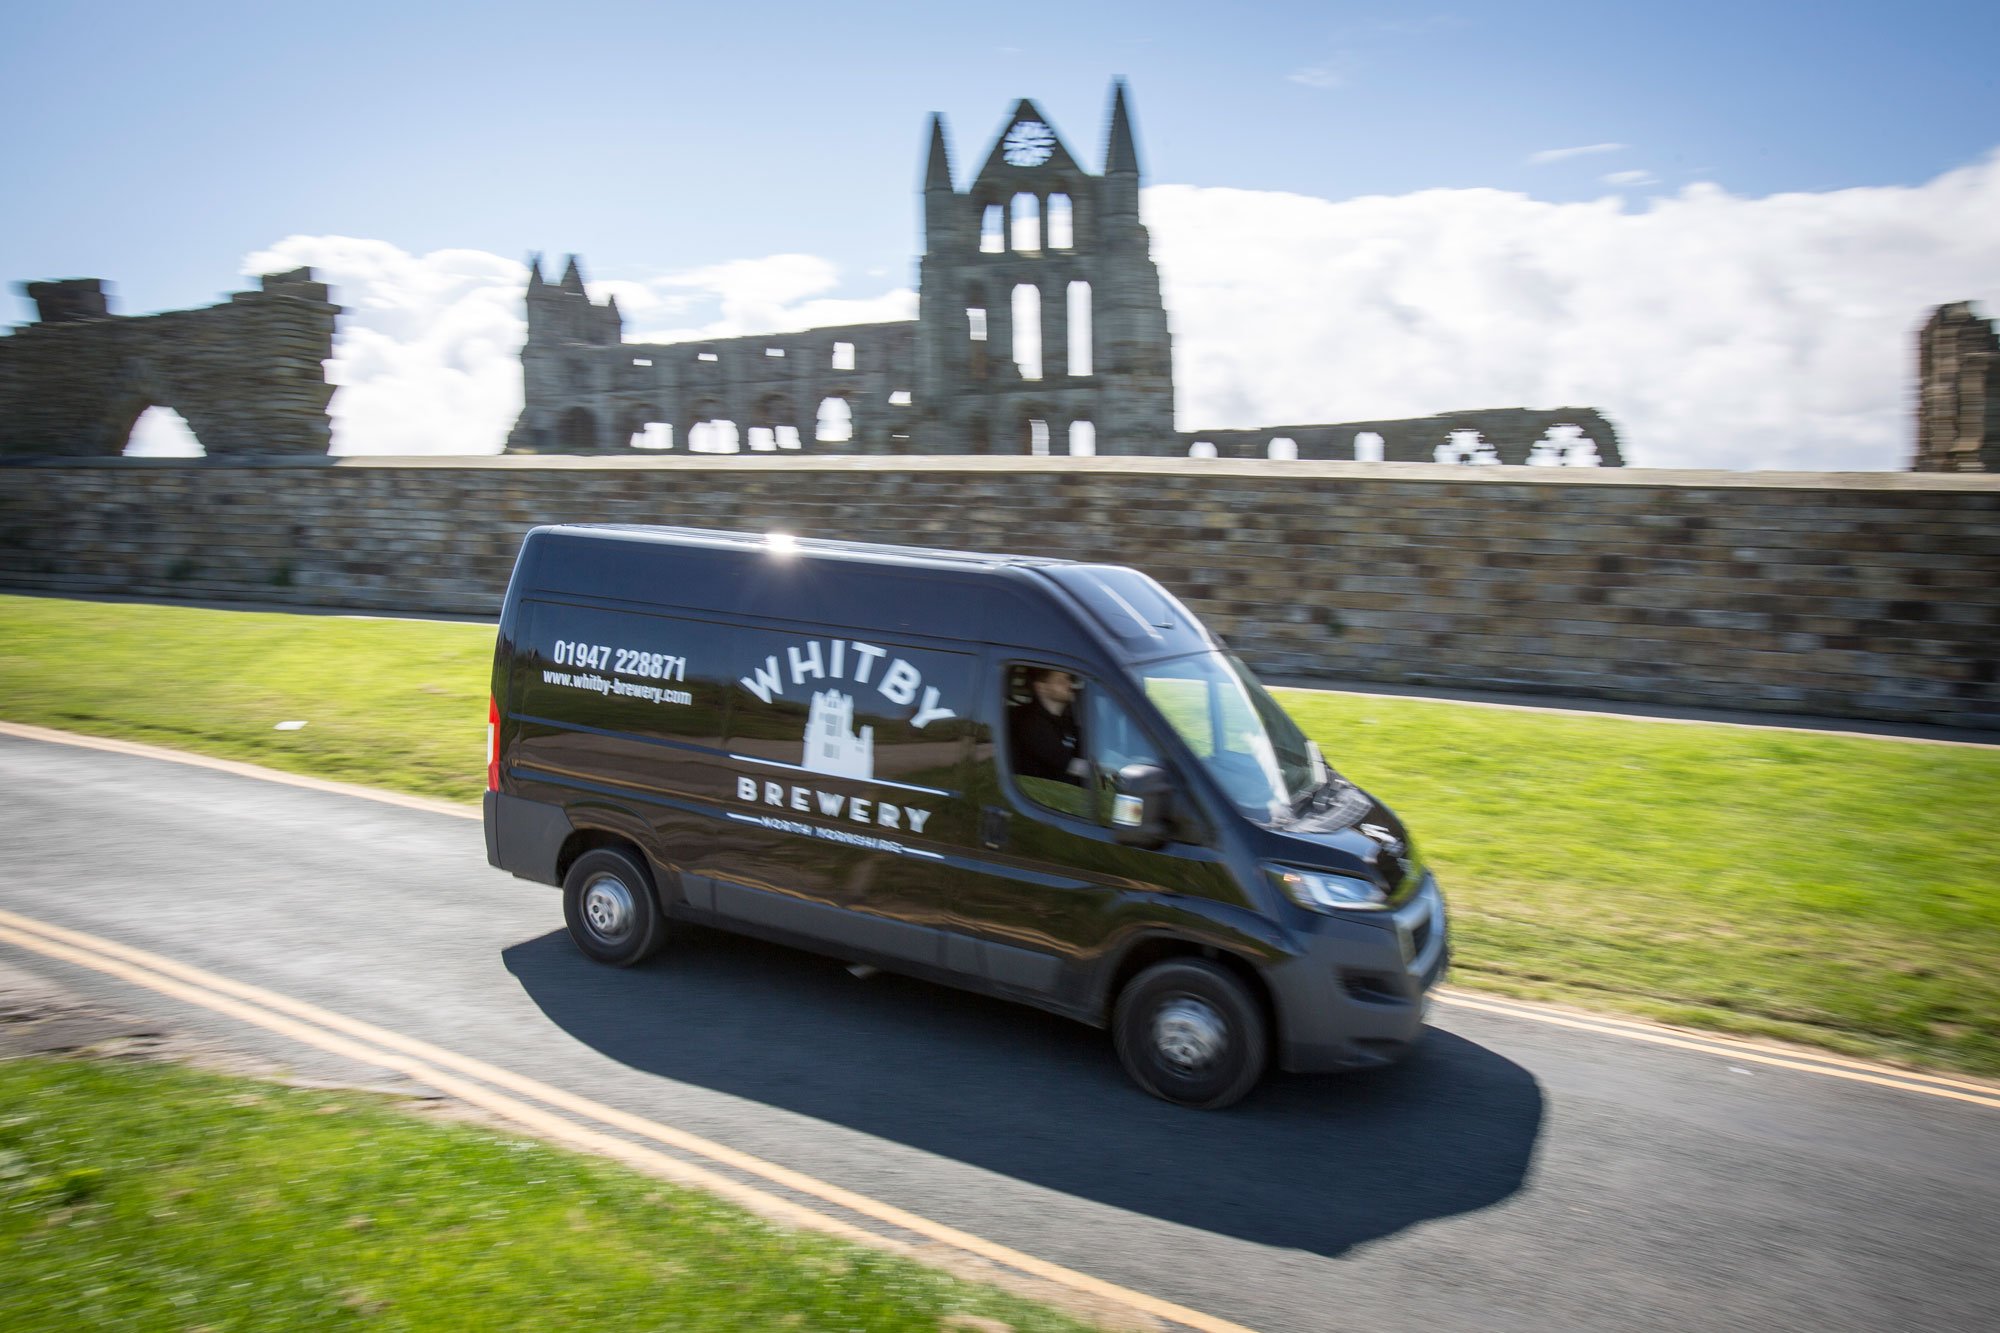 Whitby Brewery for website